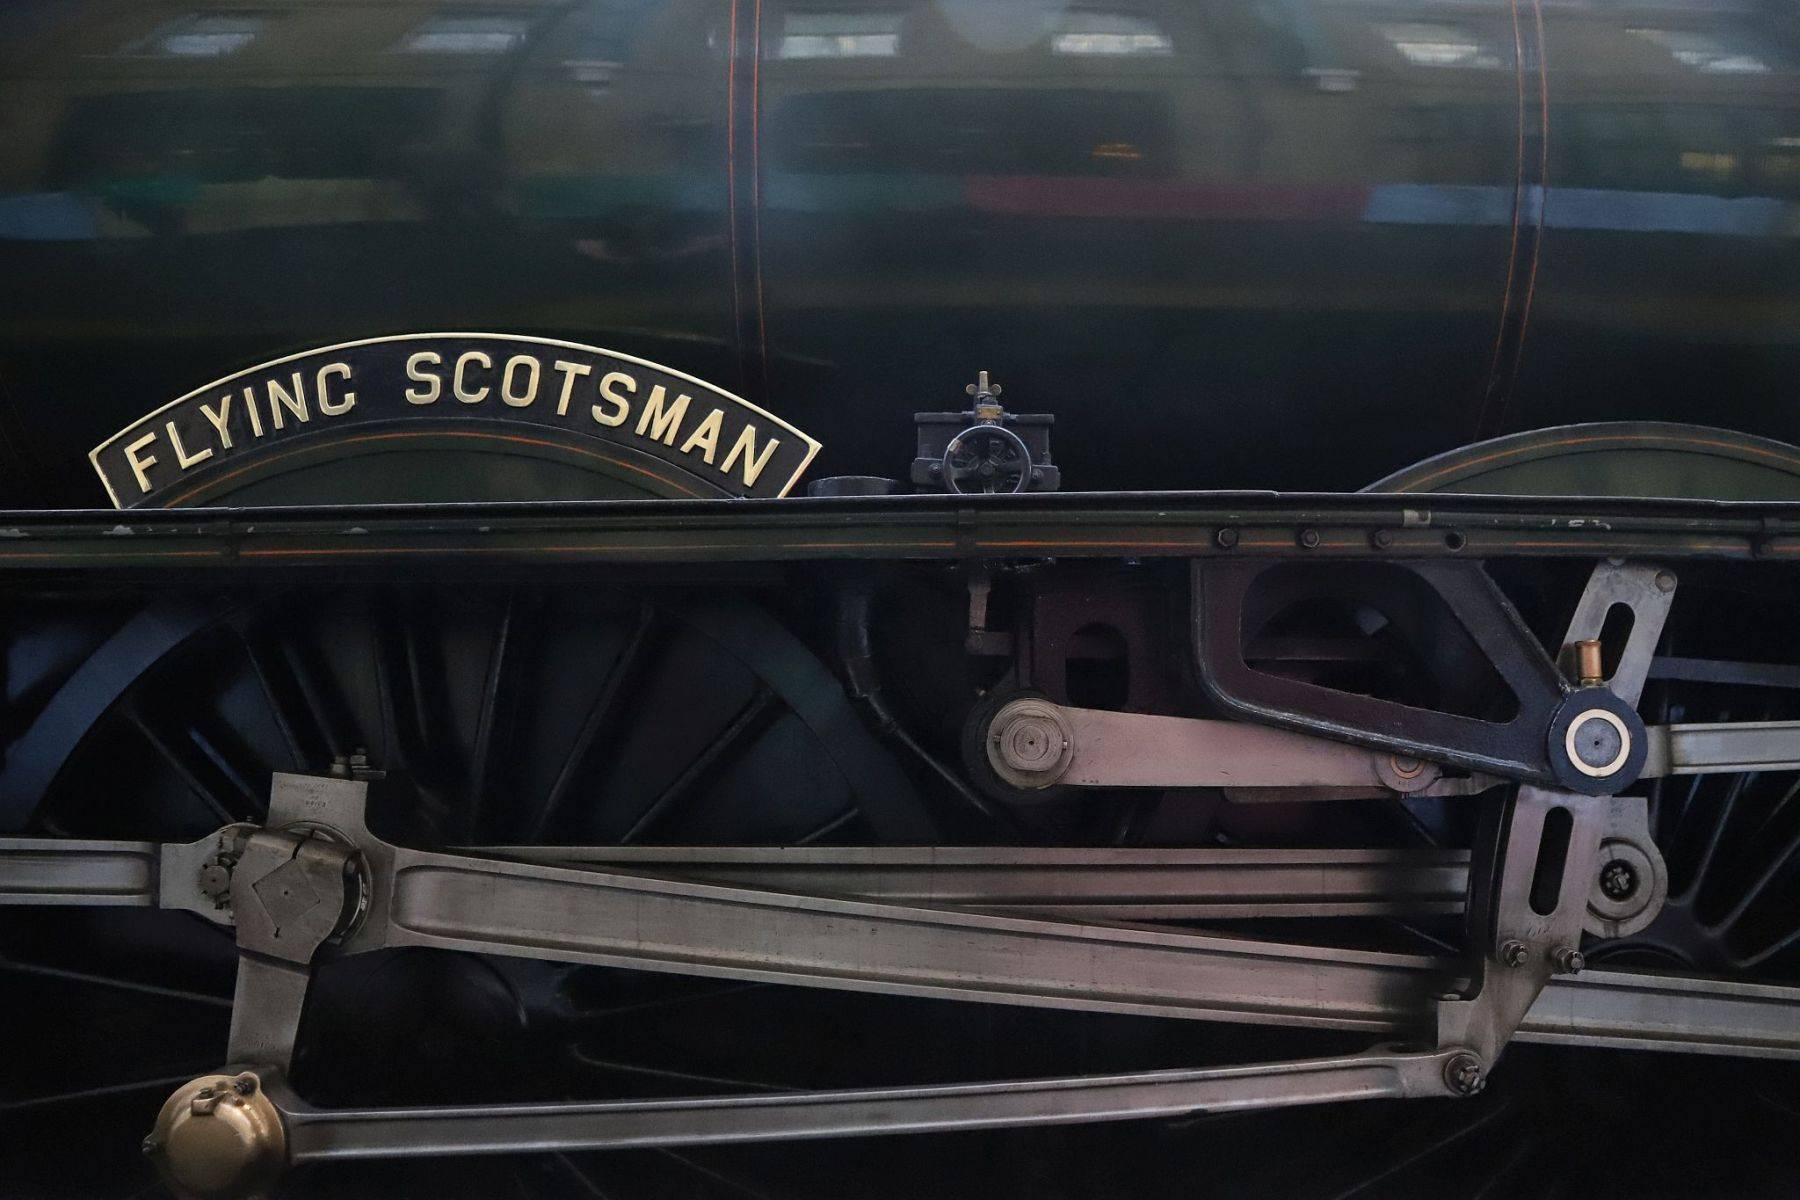 The nameplate, wheels and motion of Flying Scotsman. Flying Scotsman steam locomotive at King's Cross railway station platform 8 for the 170th anniversary of the station's opening and the start of Flying Scotsman's 100th birthday celebrations